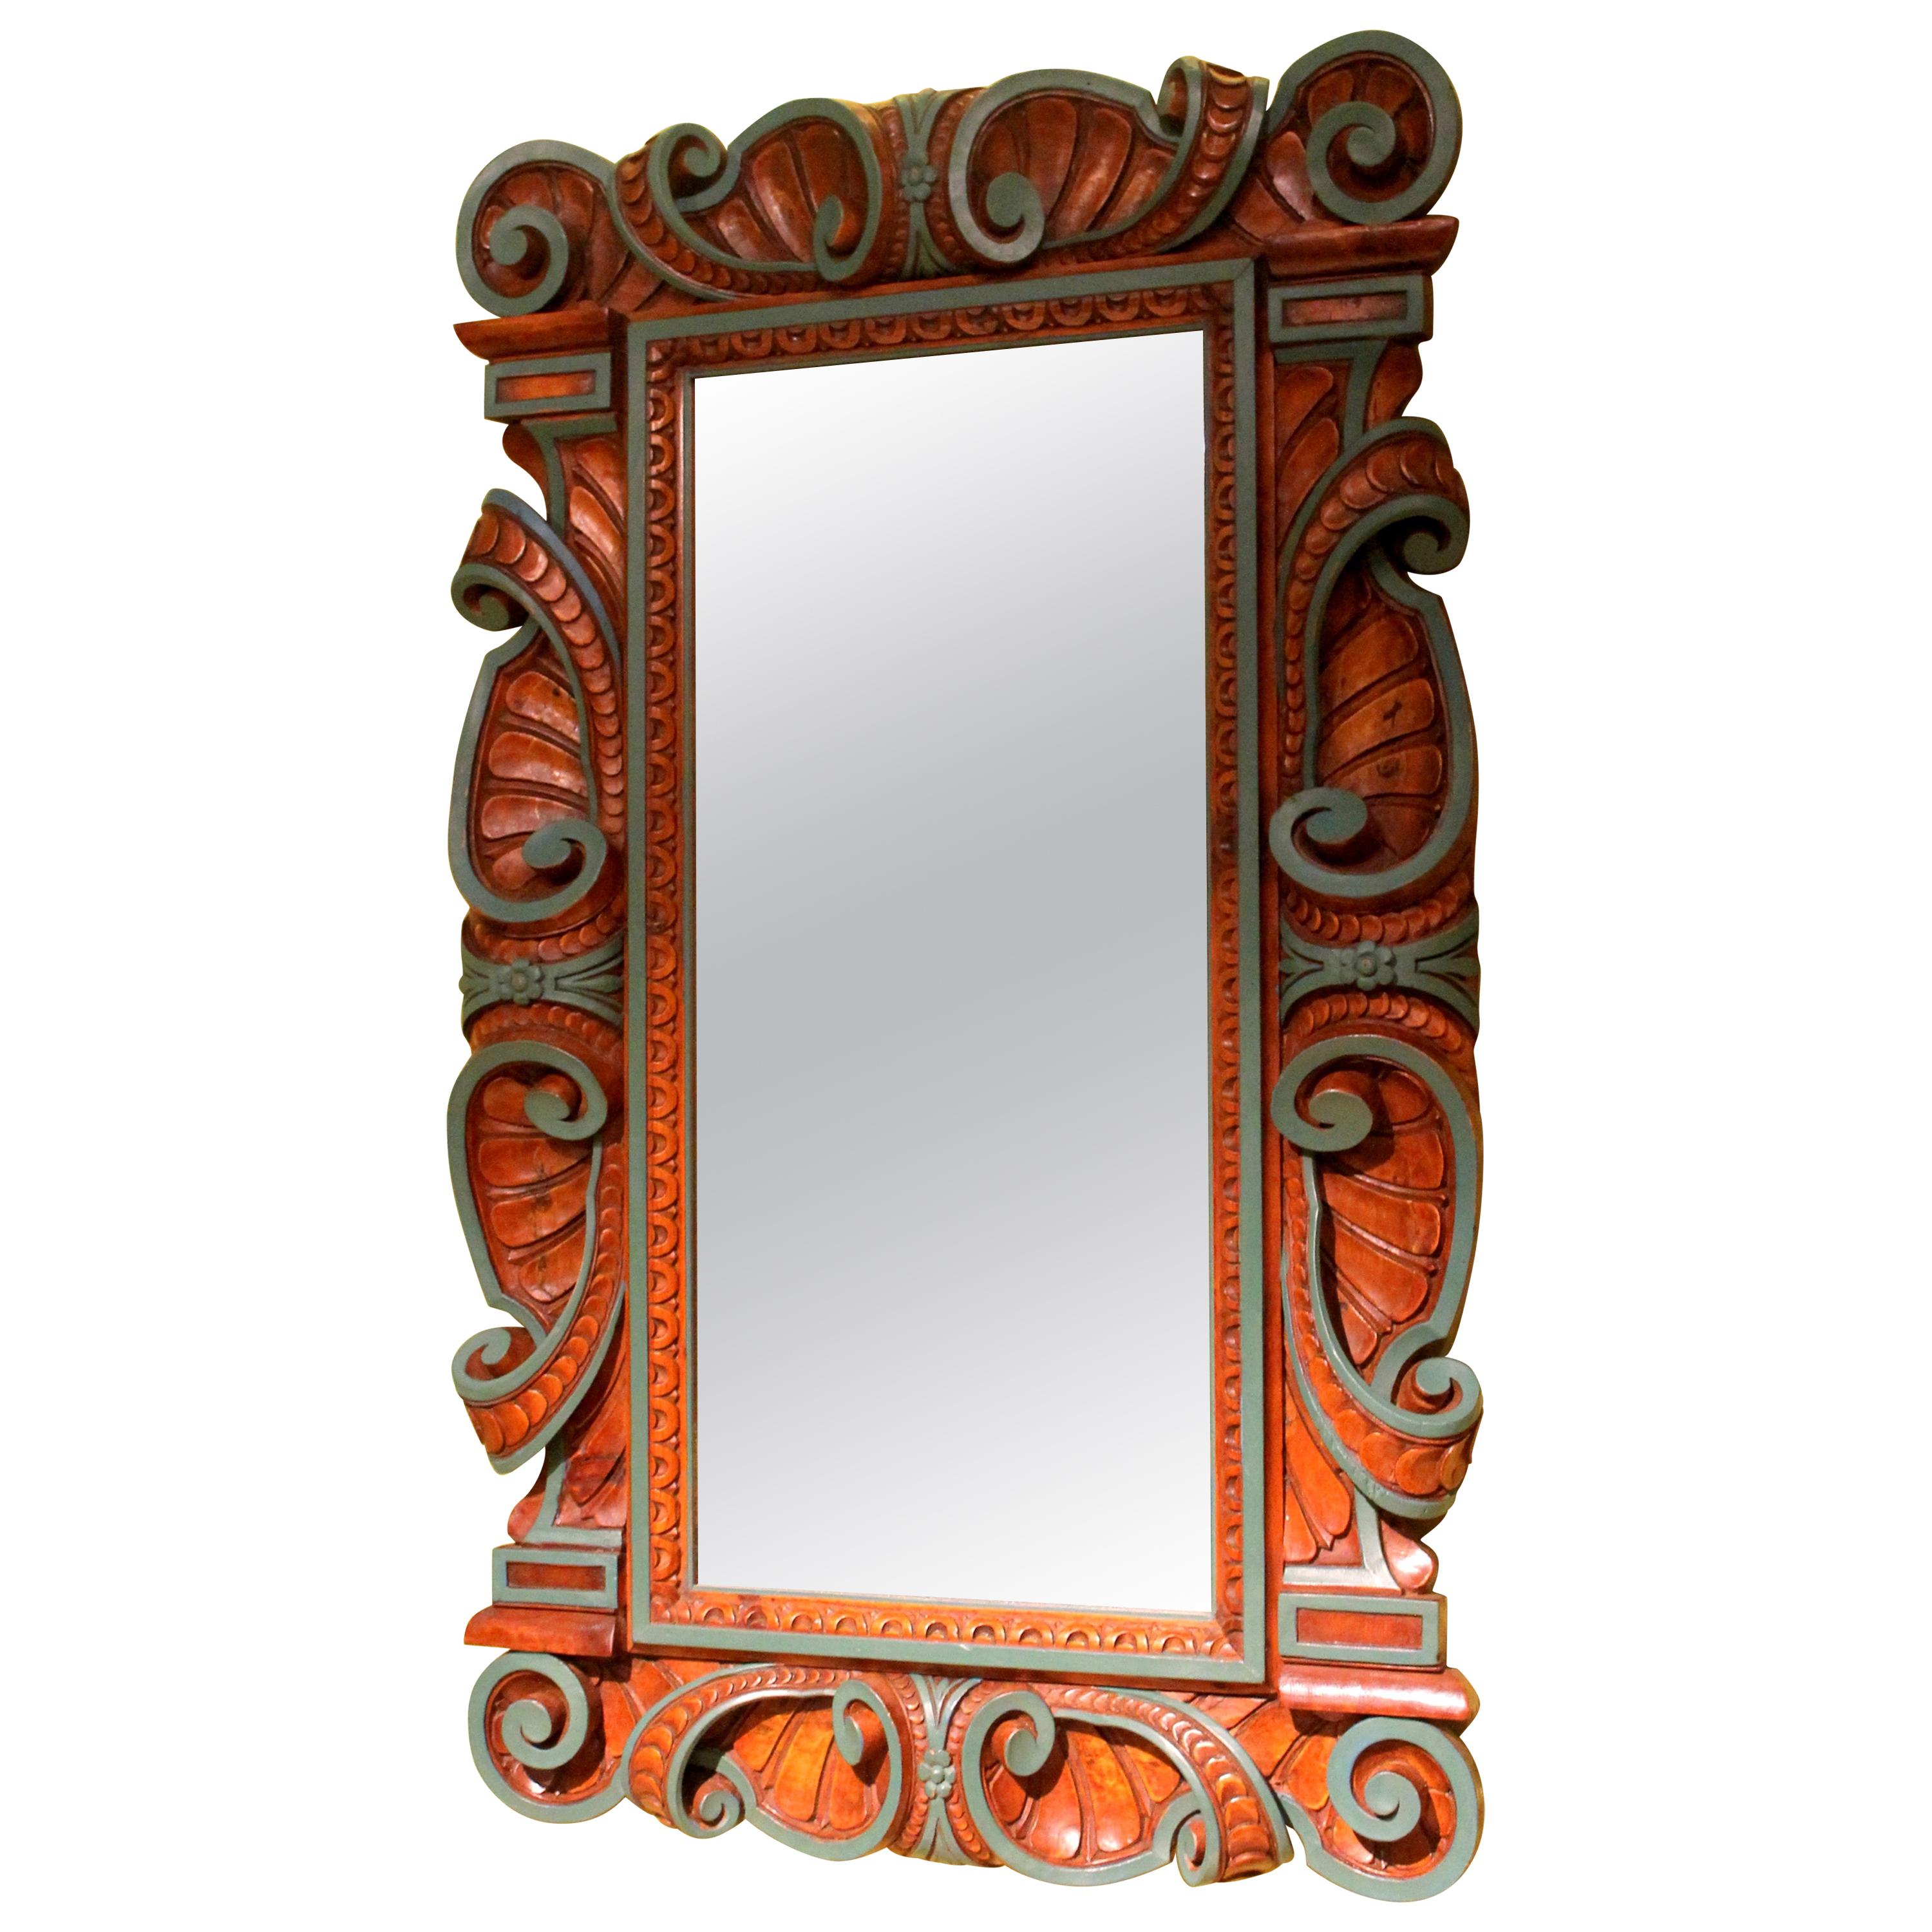 Italian Renaissance Revival Style Frame Mirror Carved and Lacquer Walnut Wood For Sale